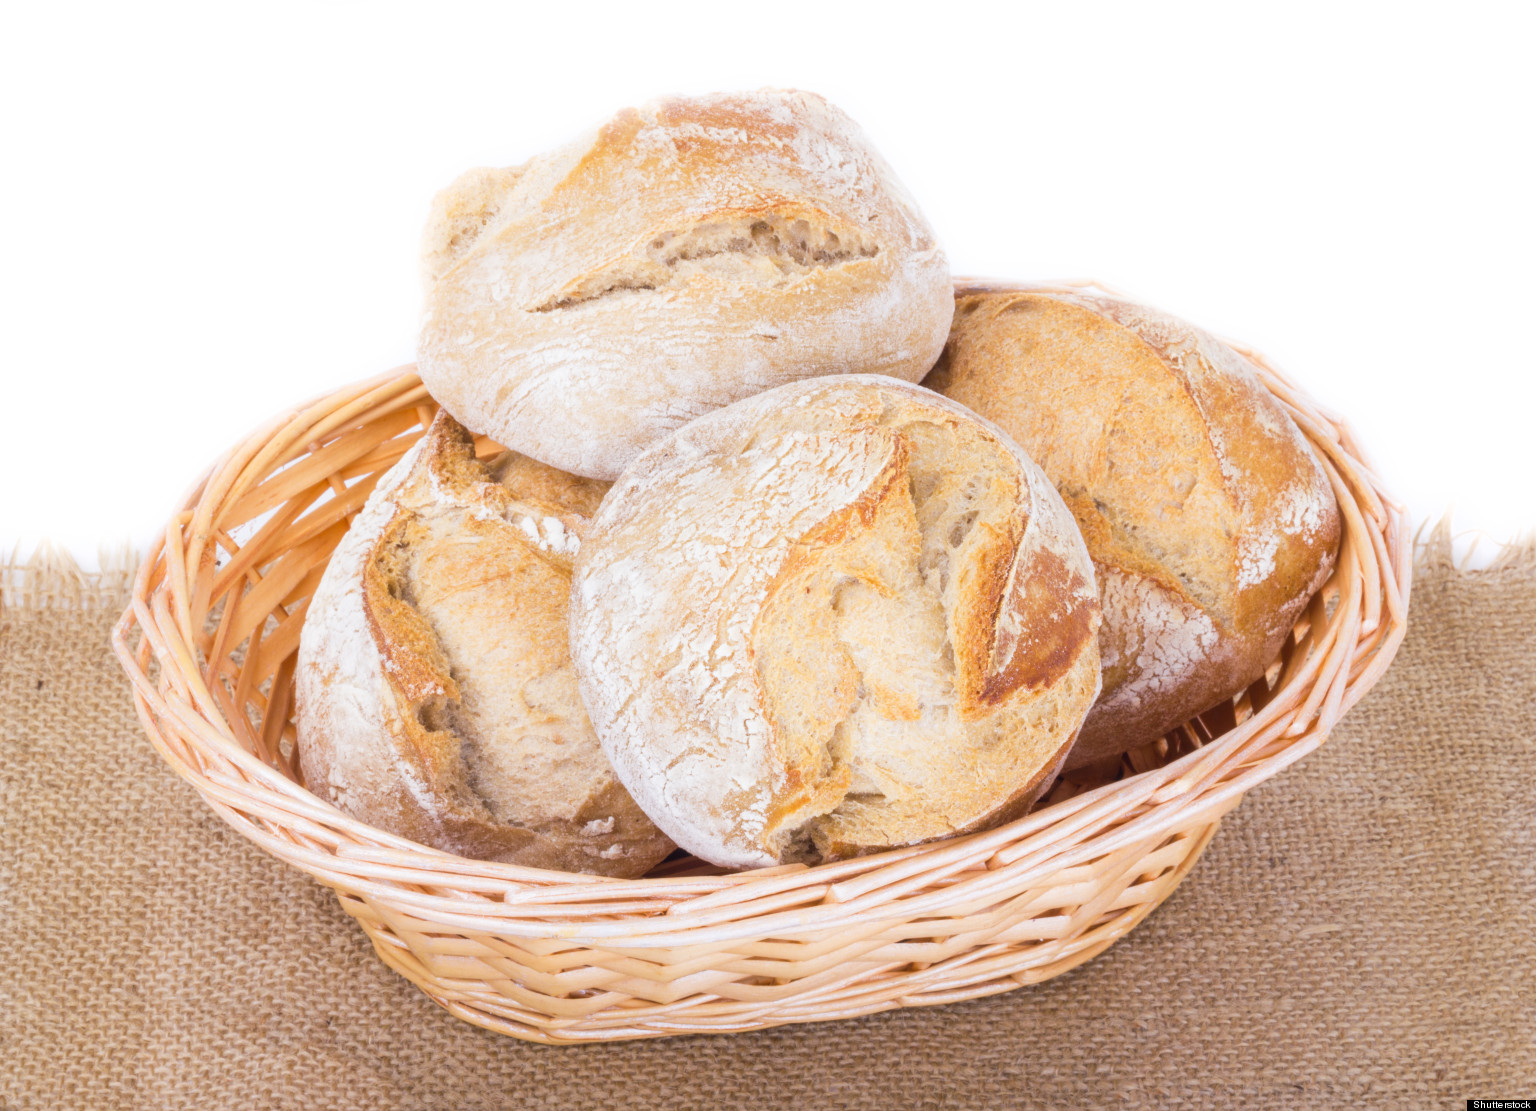 Should Restaurant Customers Get Bread or Not? | HuffPost